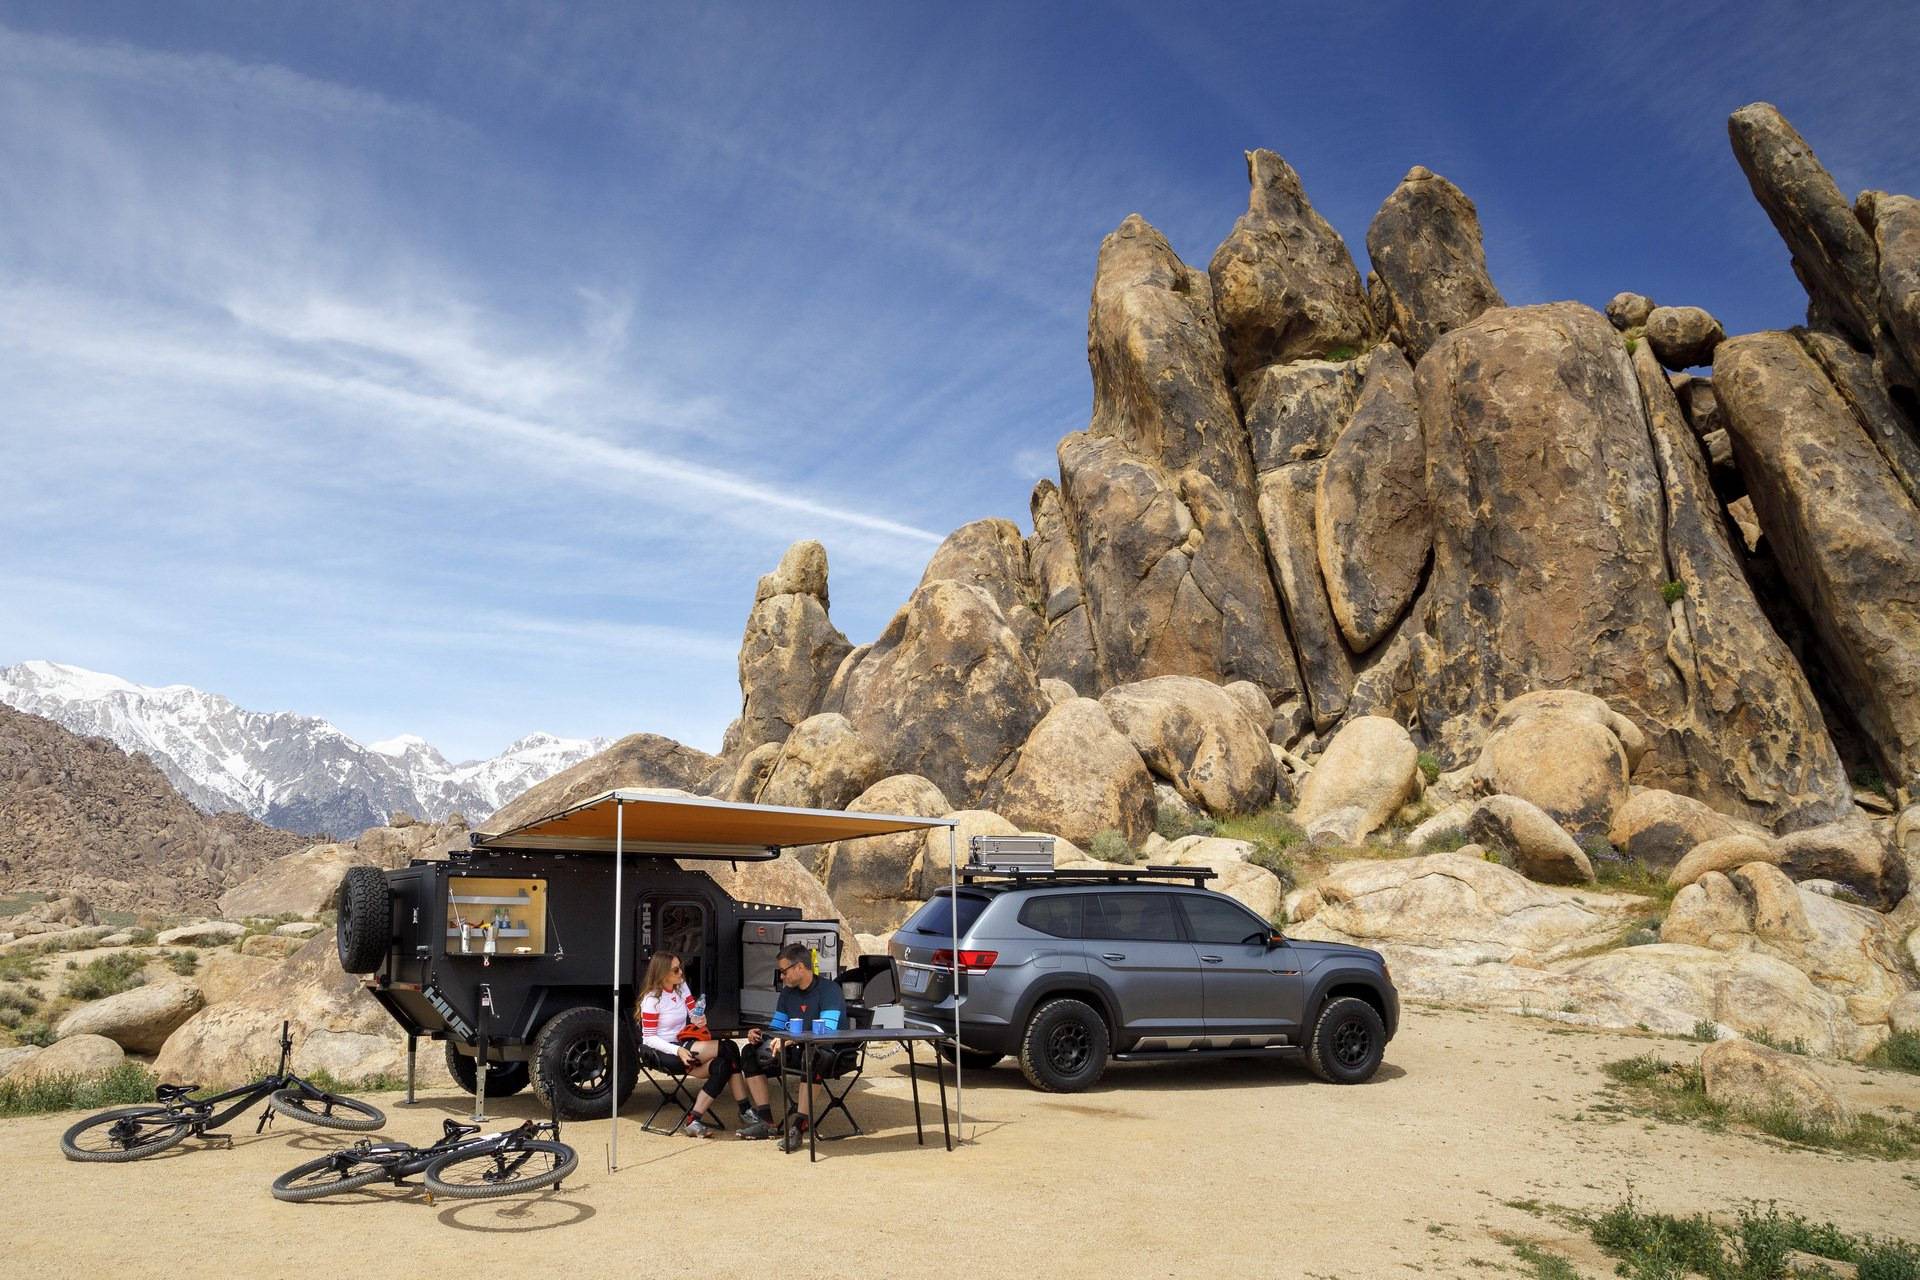 The basecamp package adds a new dynamic to the all-new 2022 volkswagen taos